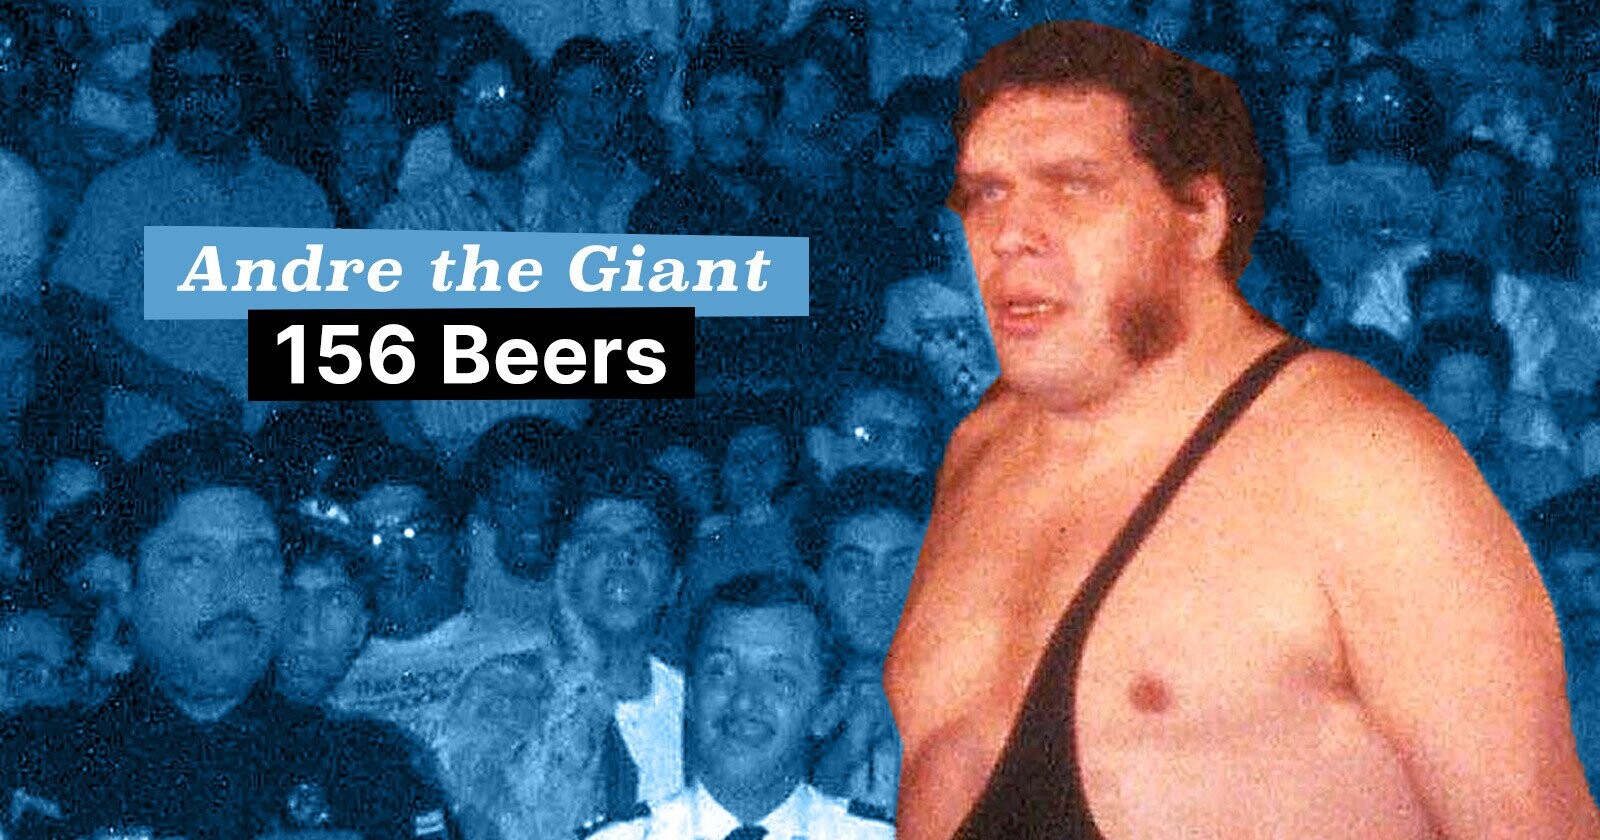 3 Athletes Who Were Famous for Drinking A Hundred Beers in A Single Sitting